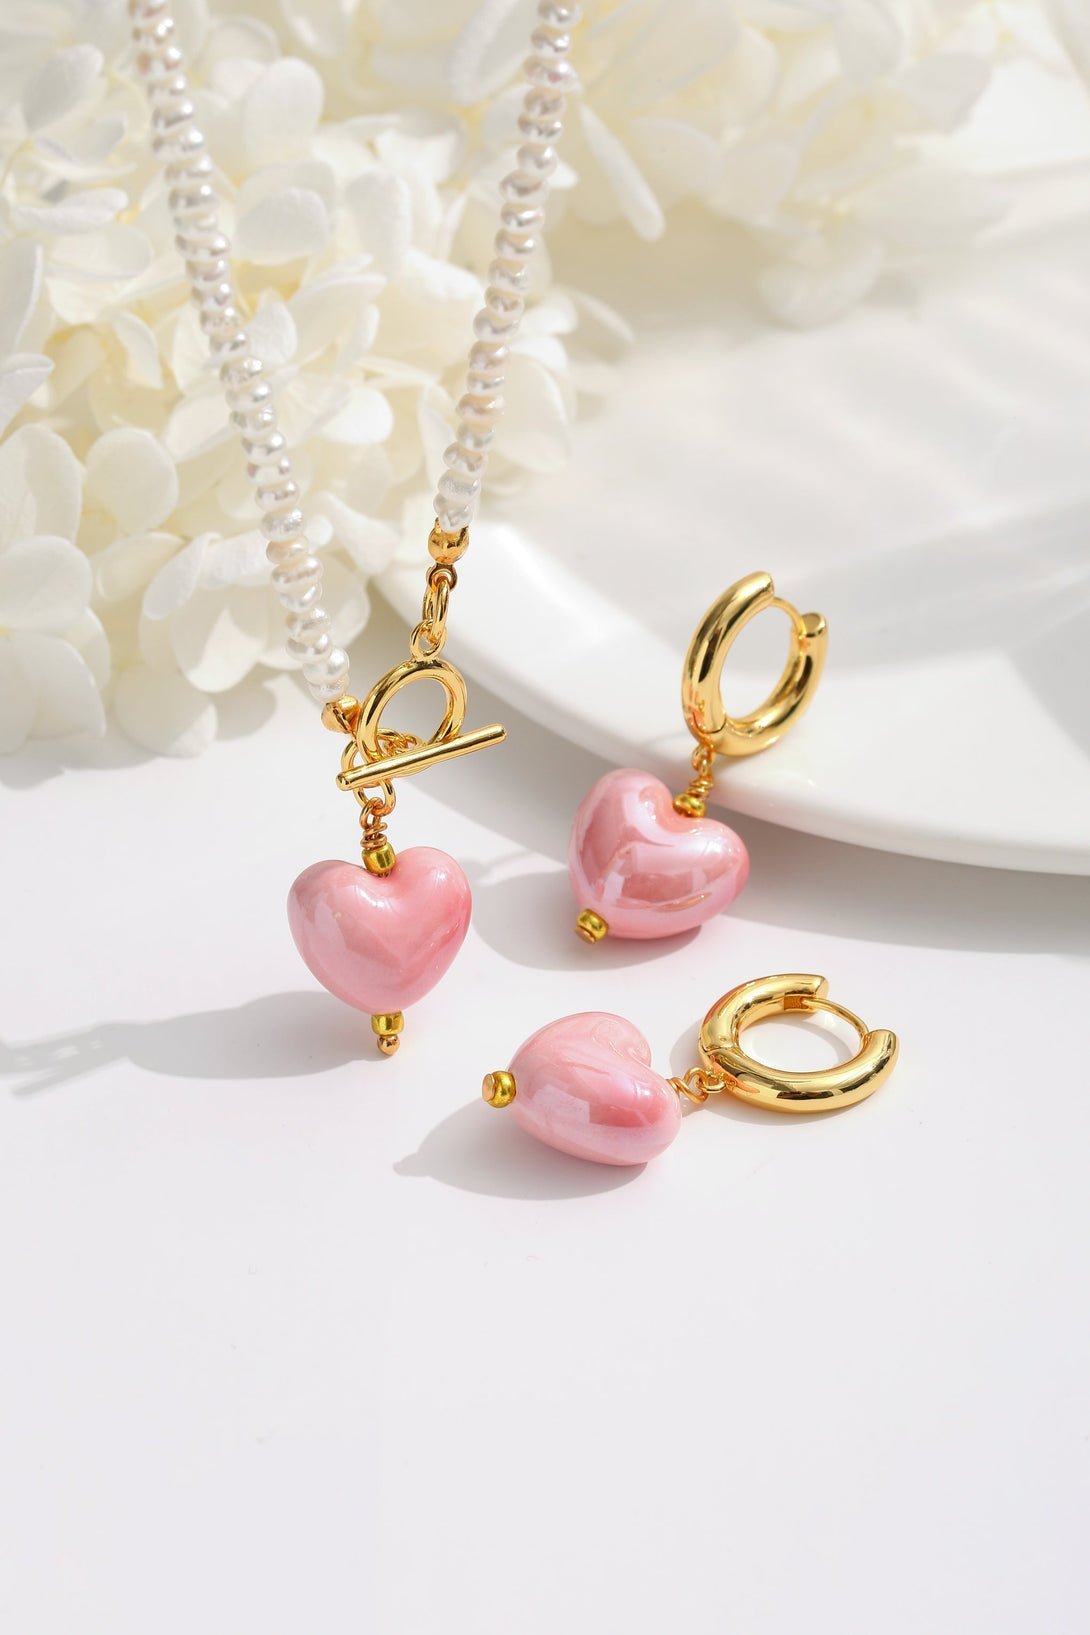 Pink Ceramic Heart Pendant Pearl Necklace - Classicharms